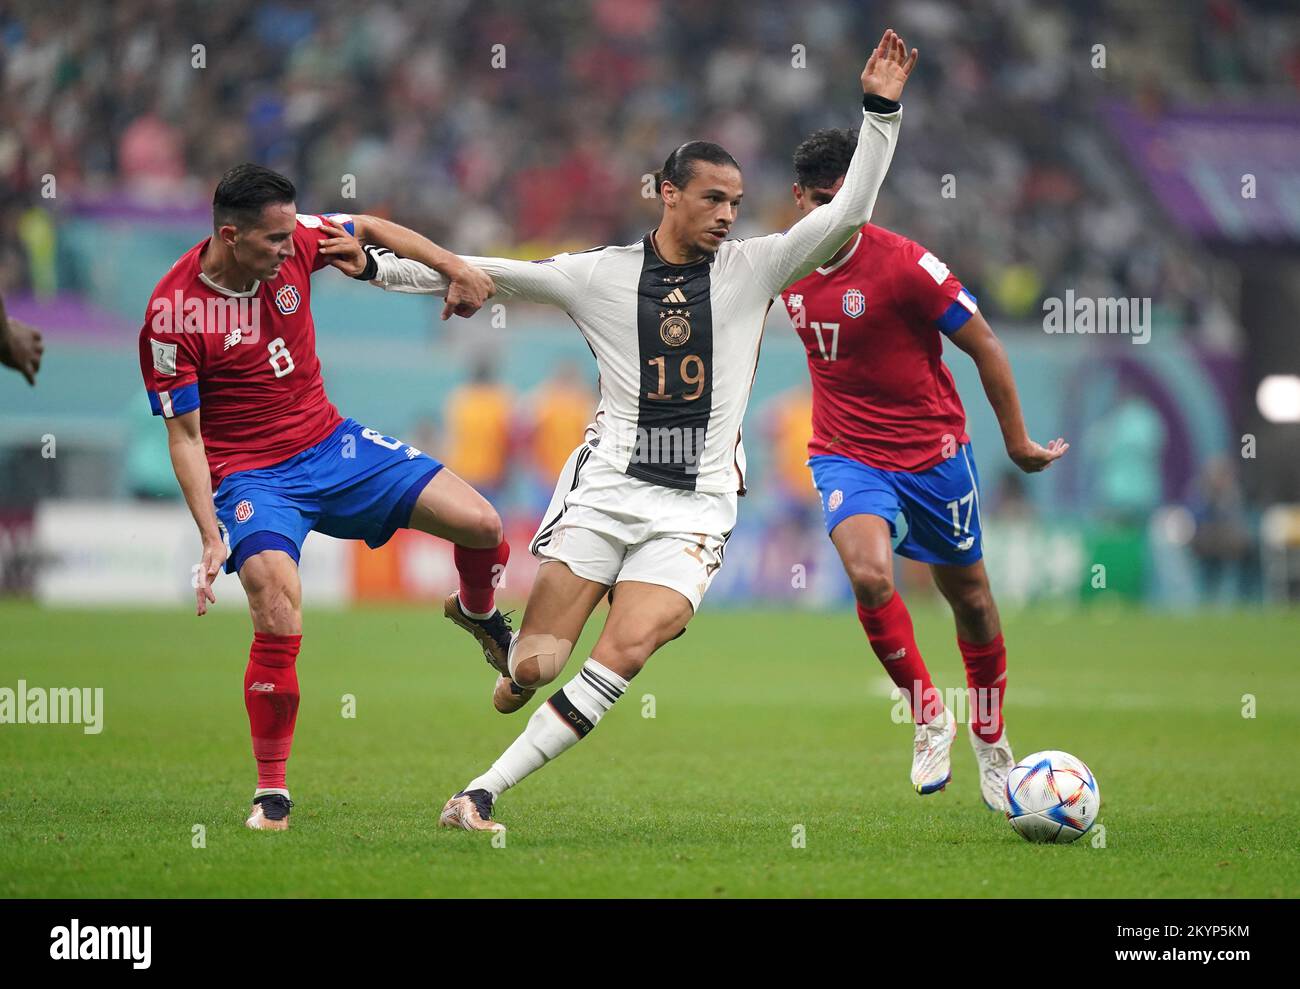 Germany's Leroy Sane (centre) under pressure from Costa Rica's Bryan Oviedo (left) and Yeltsin Tejeda during the FIFA World Cup Group E match at the Al Bayt Stadium, Al Khor, Qatar. Picture date: Thursday December 1, 2022. Stock Photo